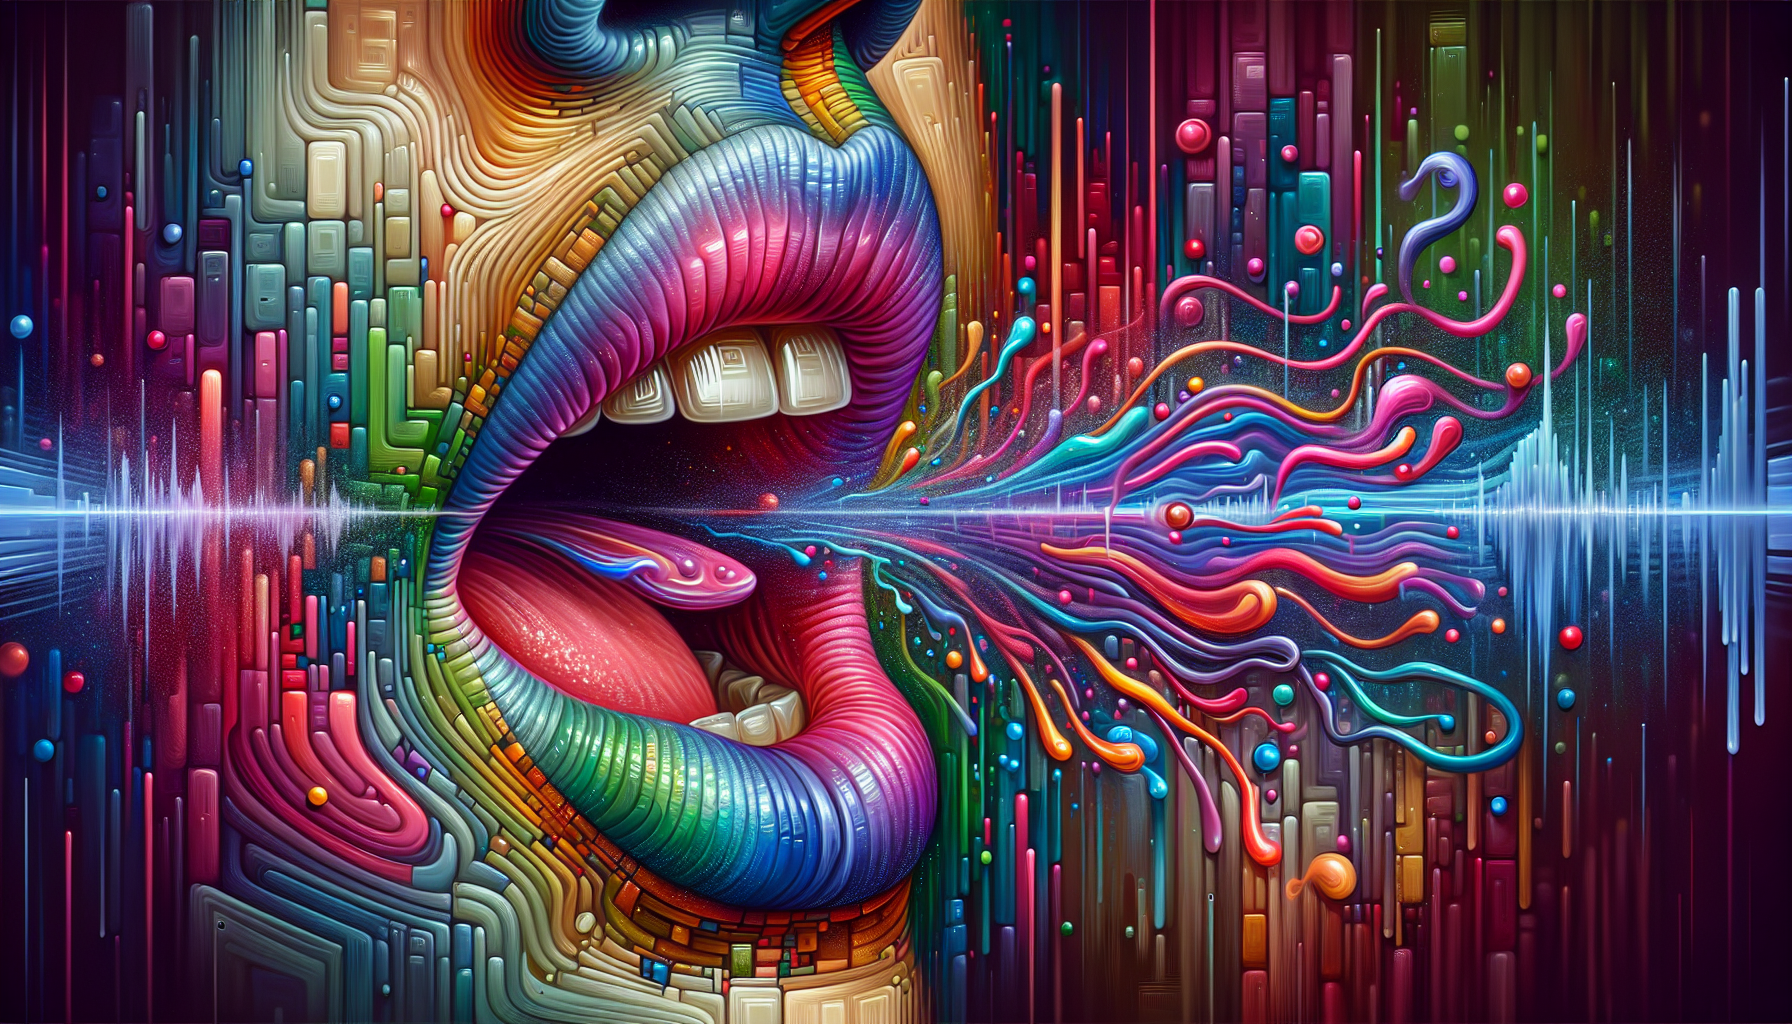 A hyperrealistic painting of a mouth speaking, with sound waves emanating from it, transforming into written words.